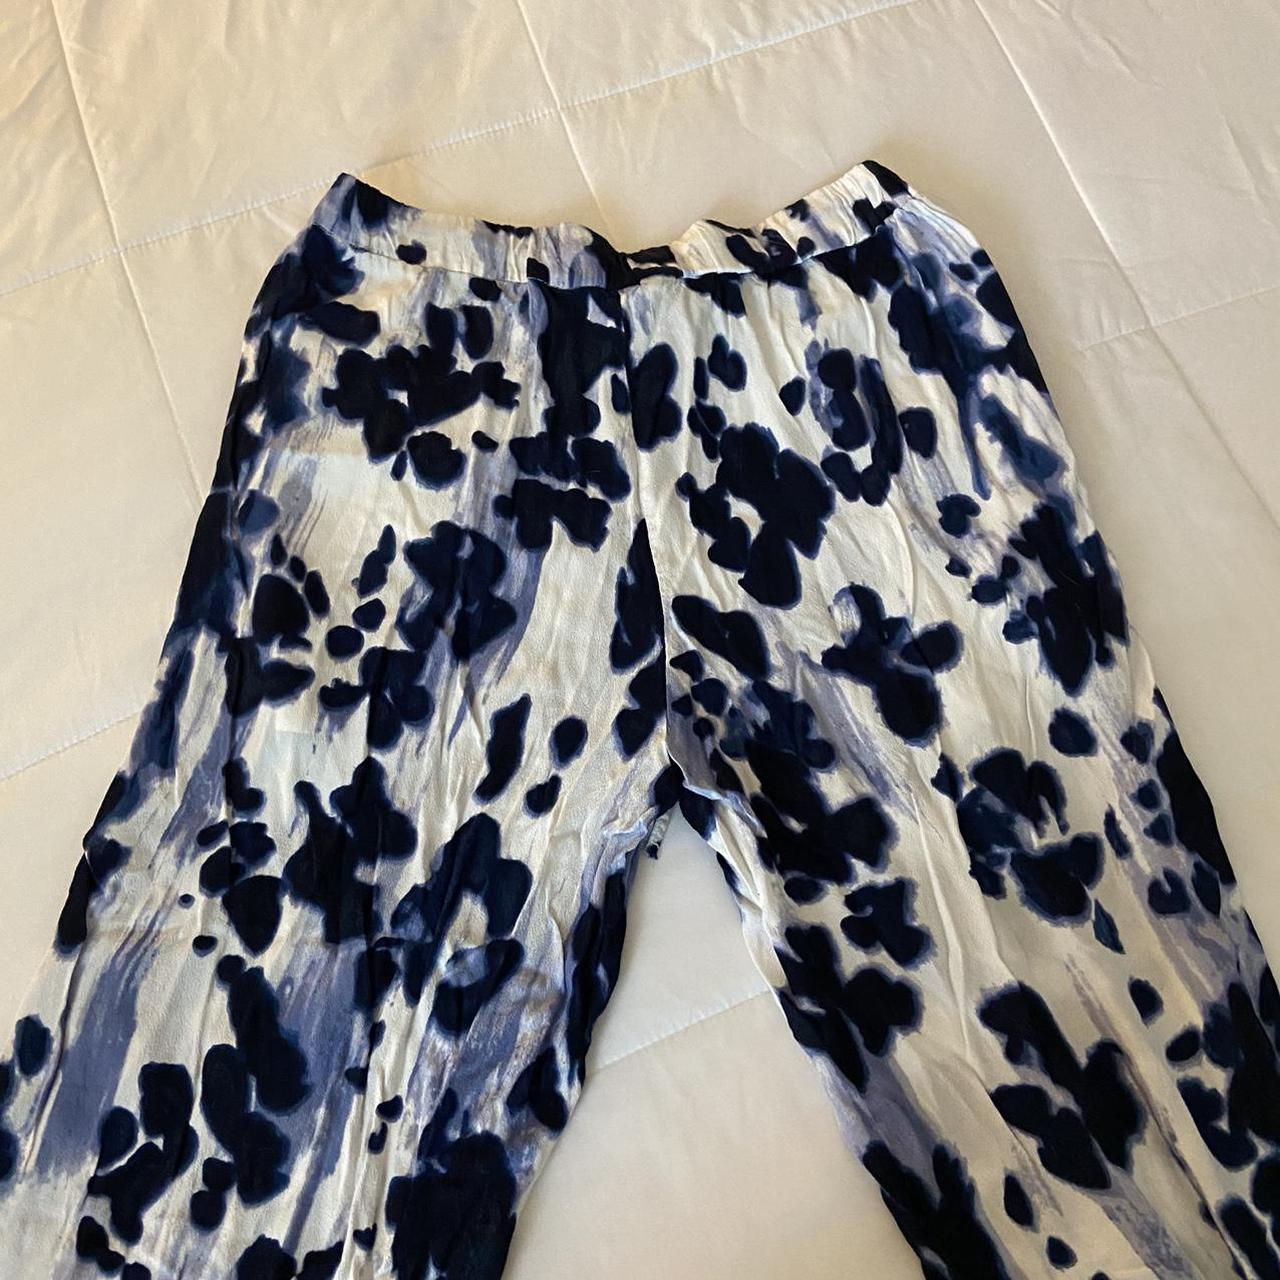 Product Image 4 - White and Blue Flowy Pants

From